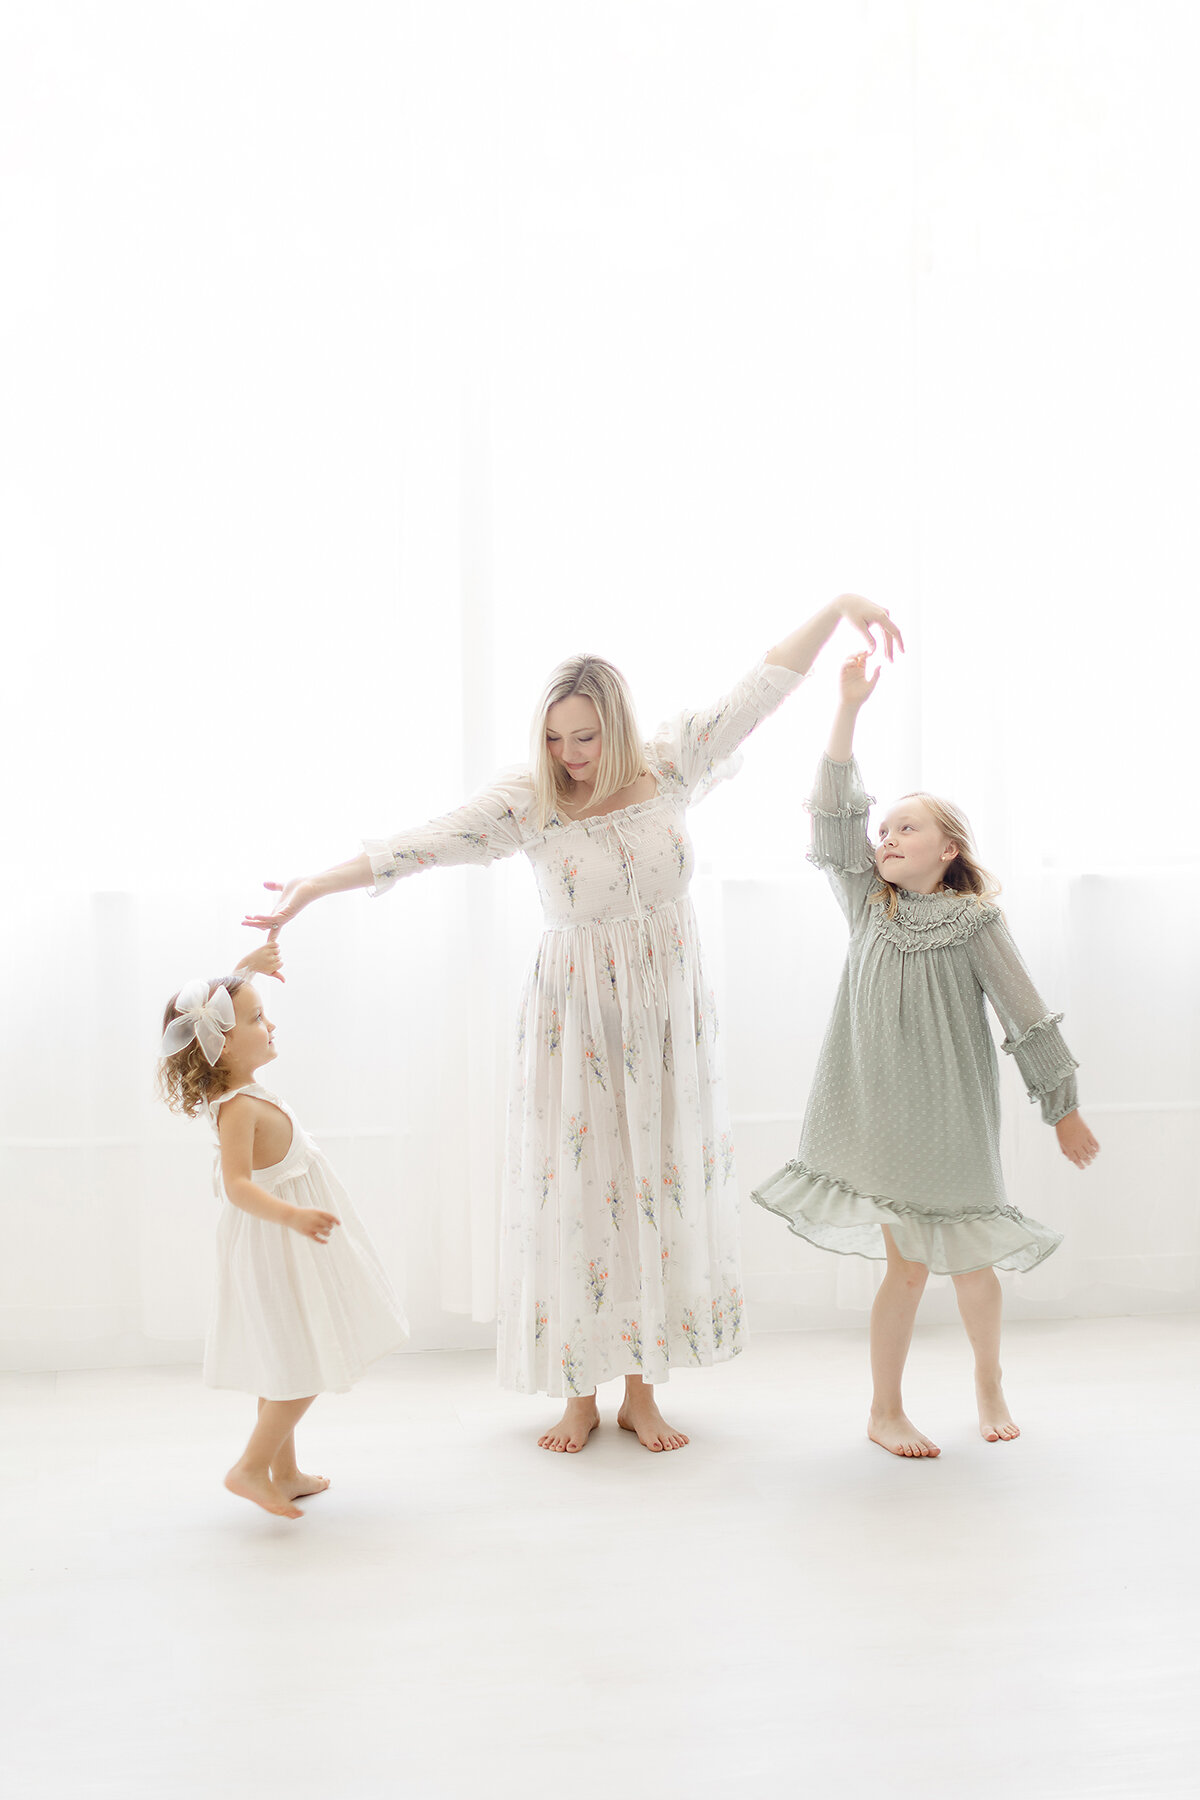 A mother with her two young daughters dancing around a Dallas/Fort worth photography studio.